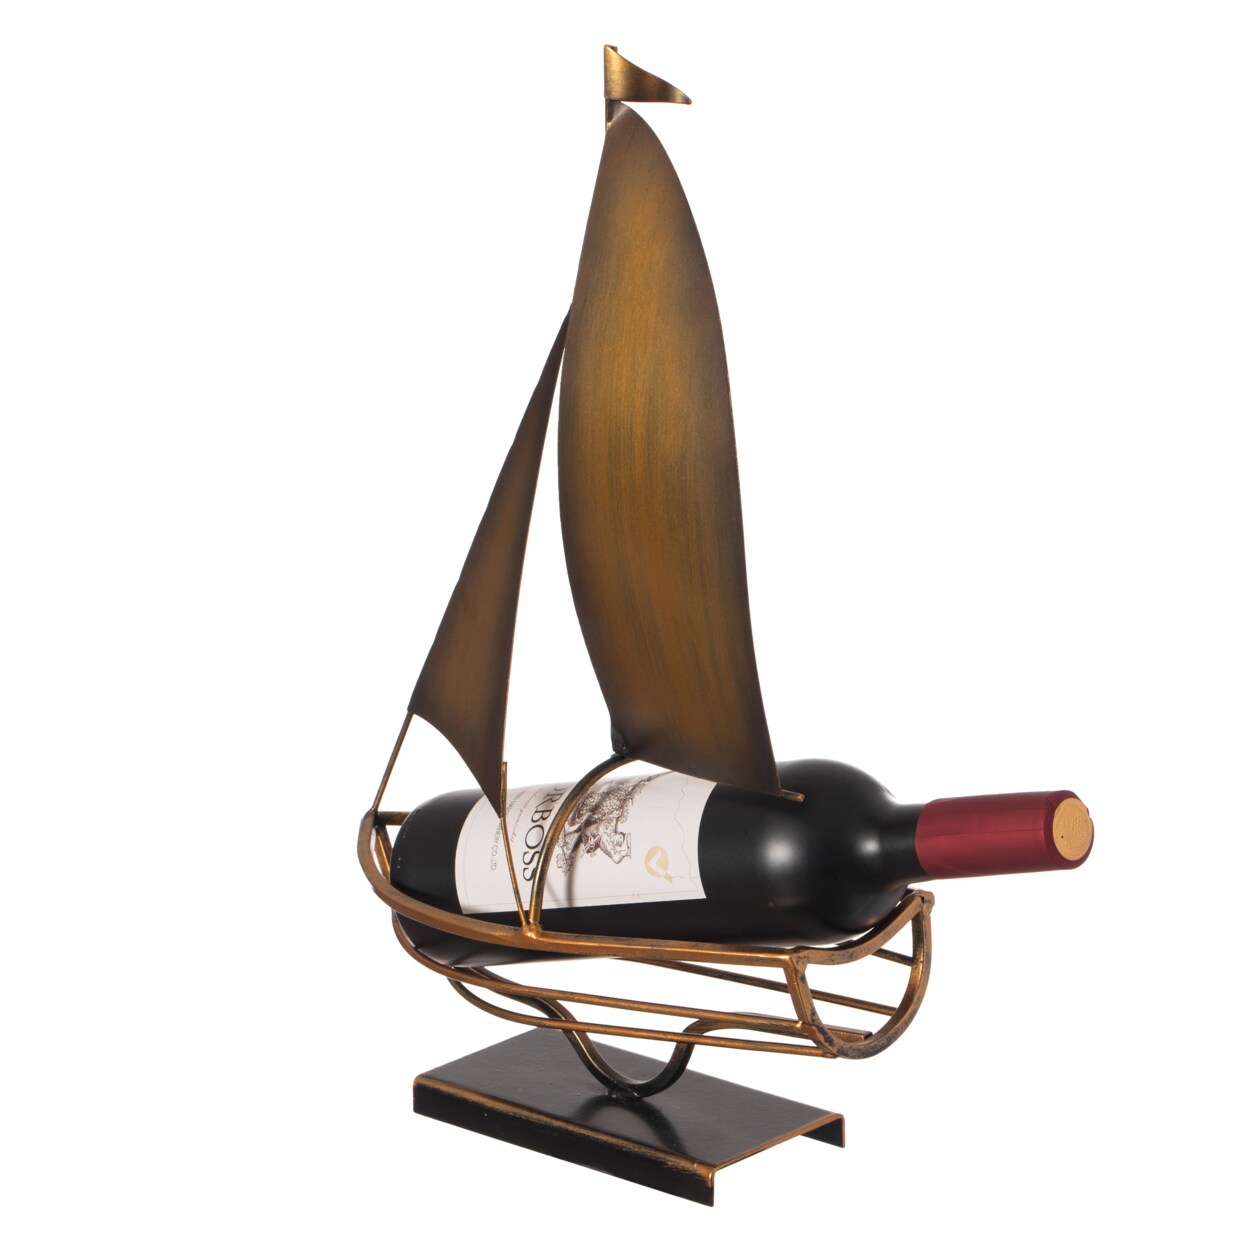 Vintiquewise Decorative Bronze Metal Vintage Single Bottle Abstract Boat Wine Holder for Tabletop or Countertop